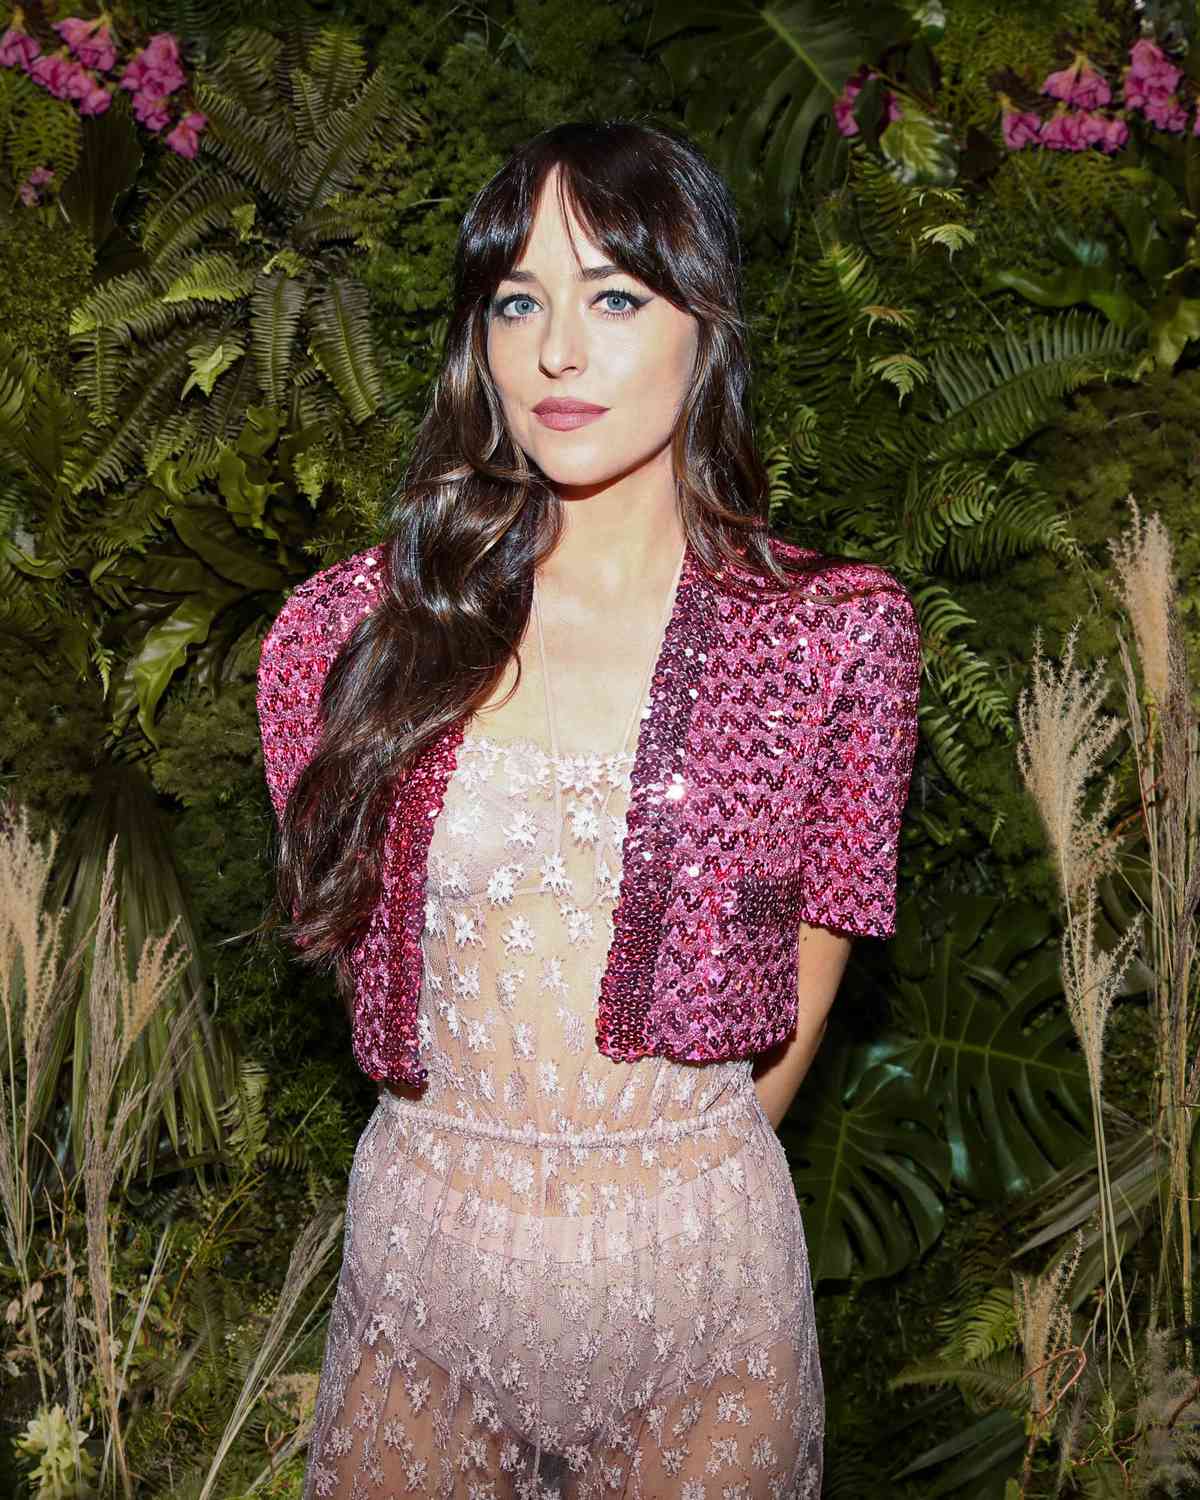 Dakota Johnson Wore a Sheer Lace Jumpsuit With a Sequined Shrug